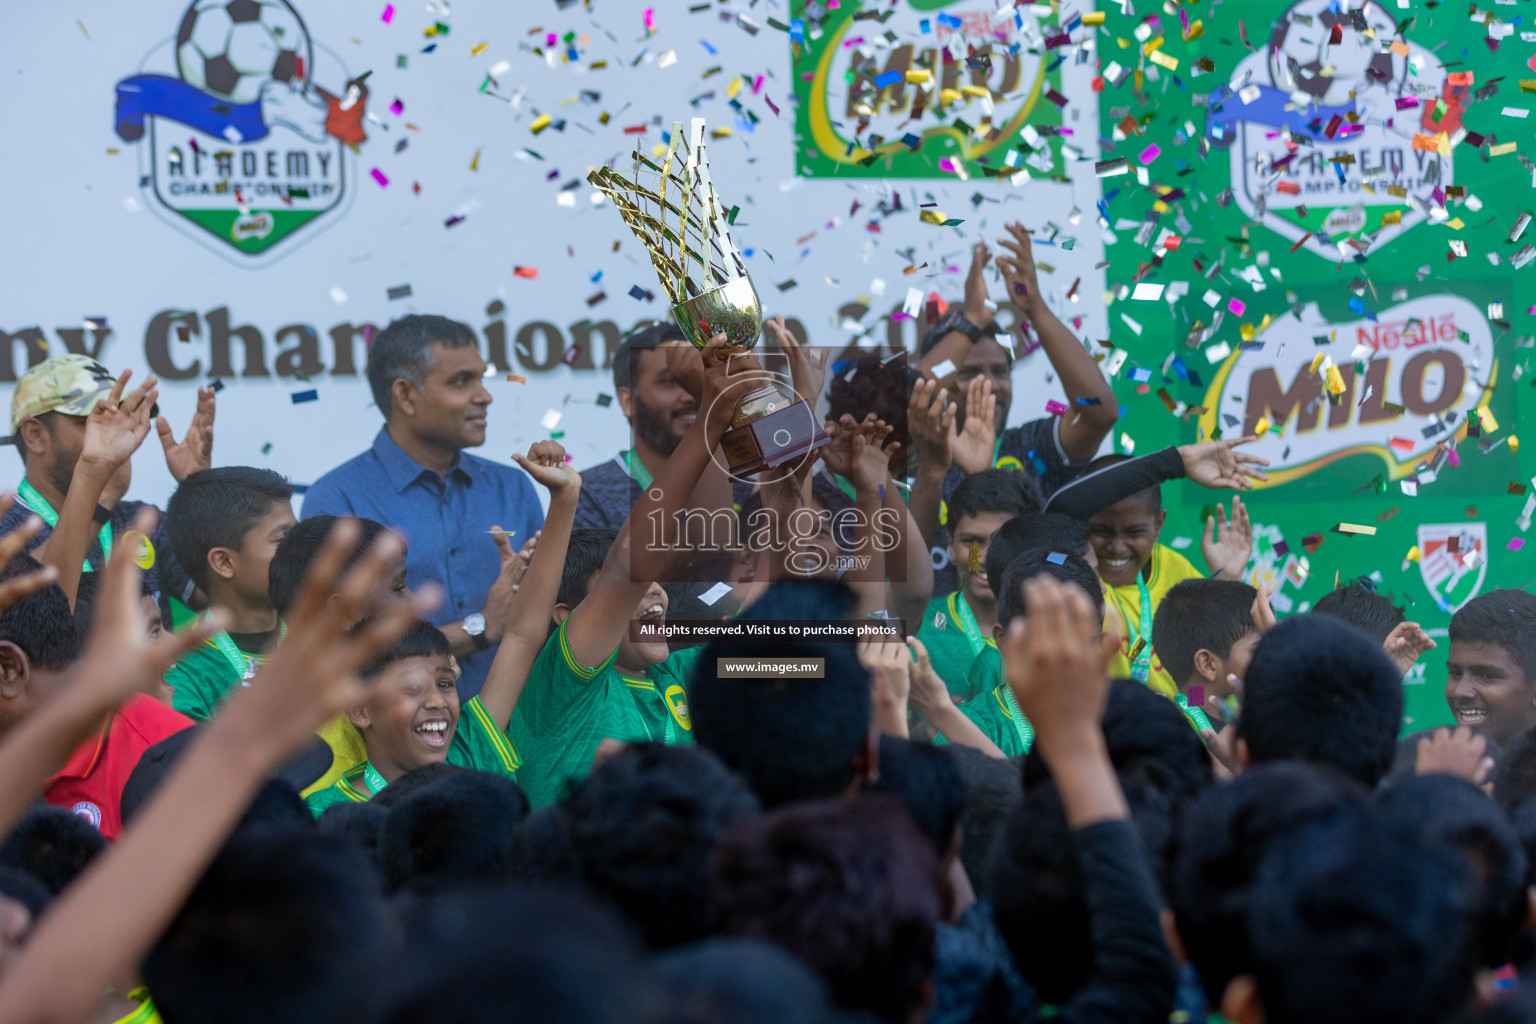 Day 2 of MILO Academy Championship 2023 (U12) was held in Henveiru Football Grounds, Male', Maldives, on Saturday, 19th August 2023. Photos: Shuu  / images.mv